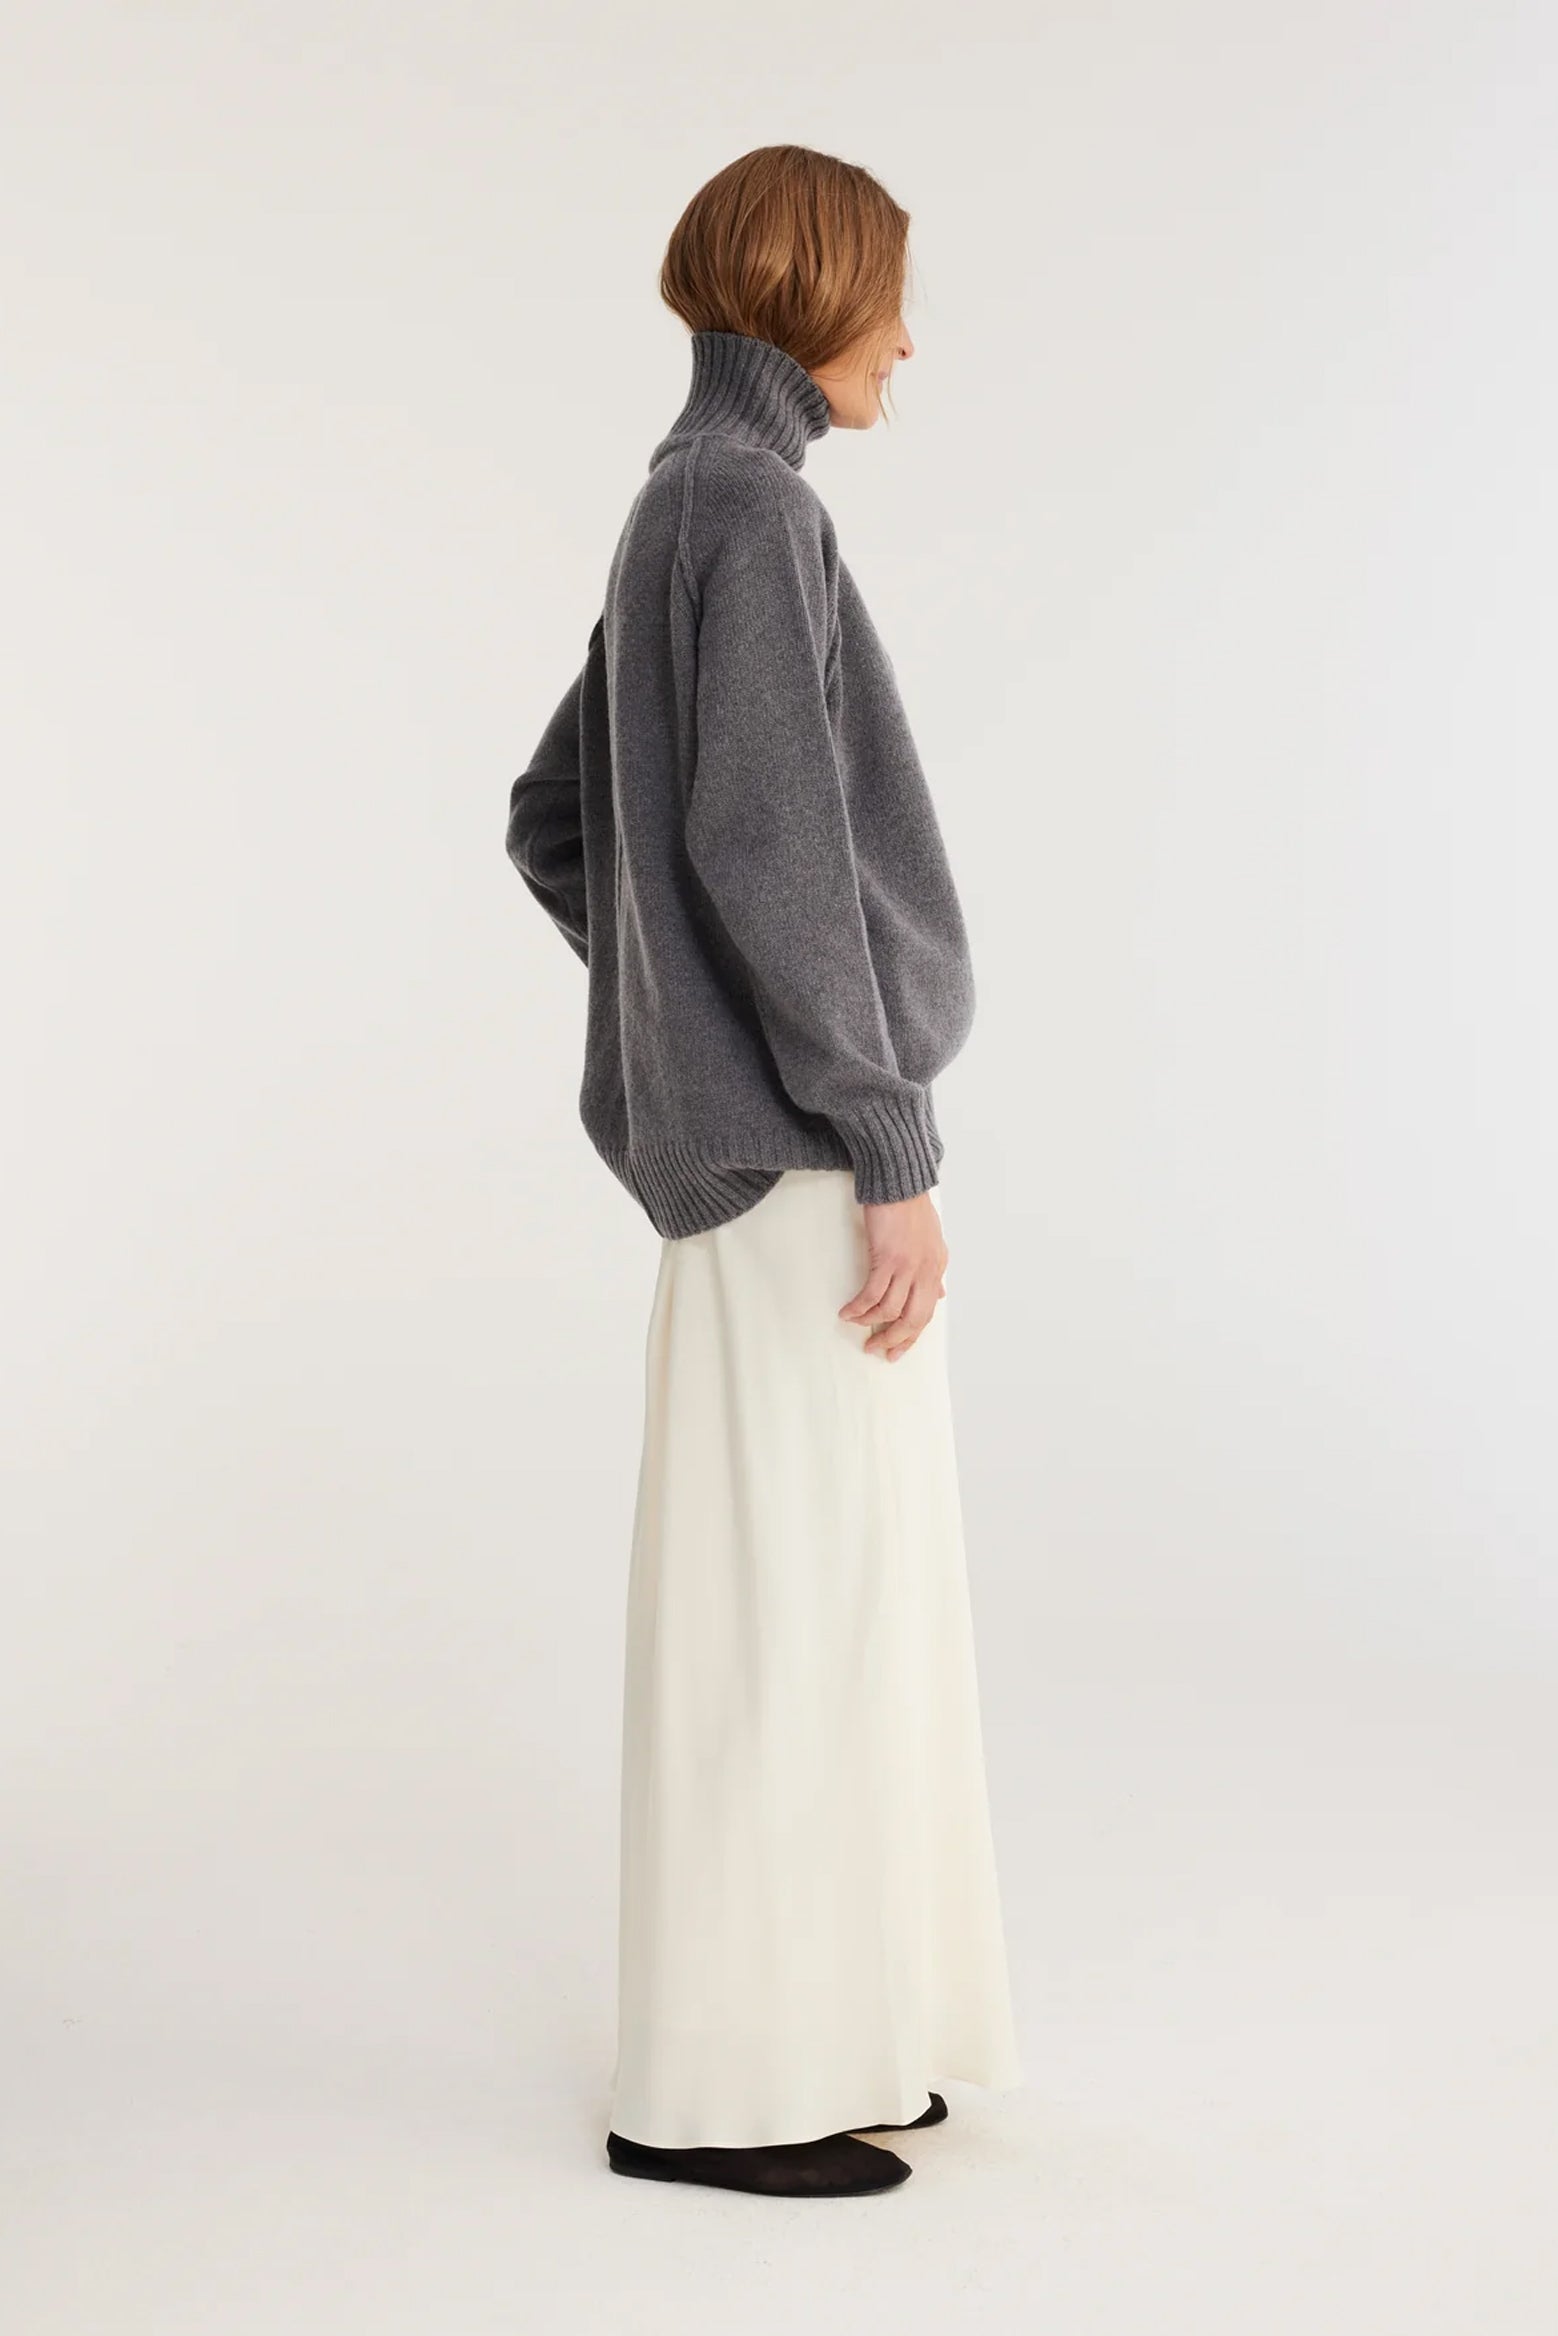 Rohe Long Satin Skirt in Cream available at The New Trend Australia.